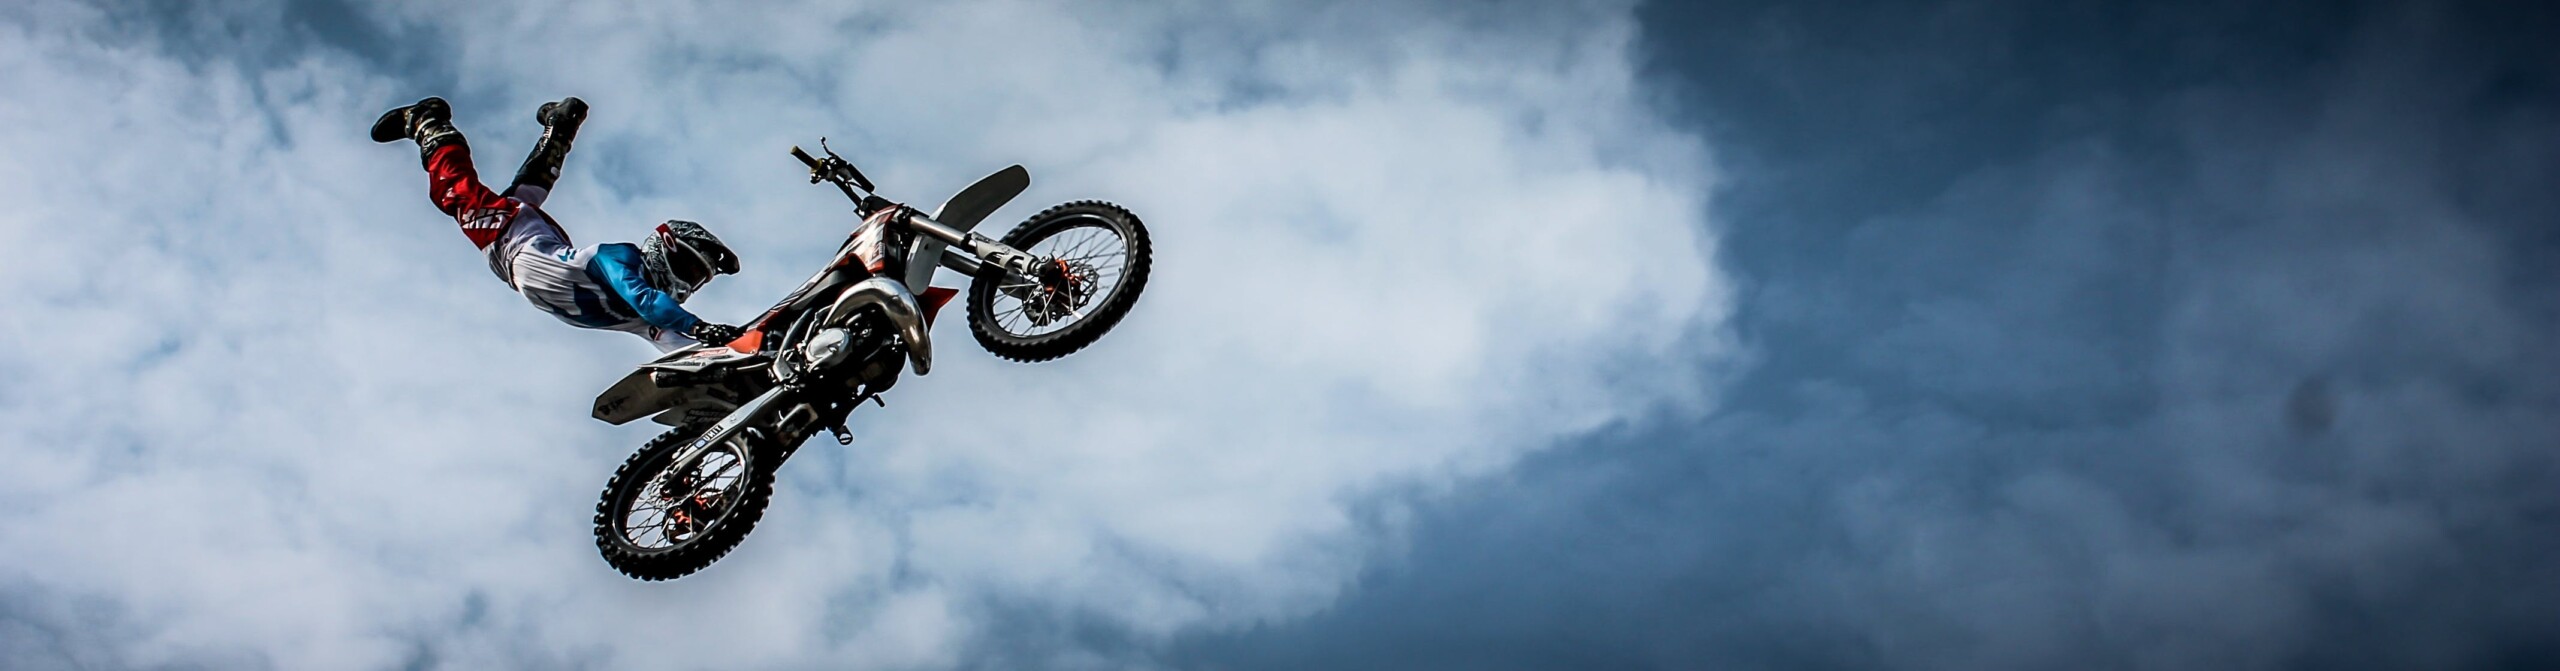 Motorbike and rider flying through the air doing a trick